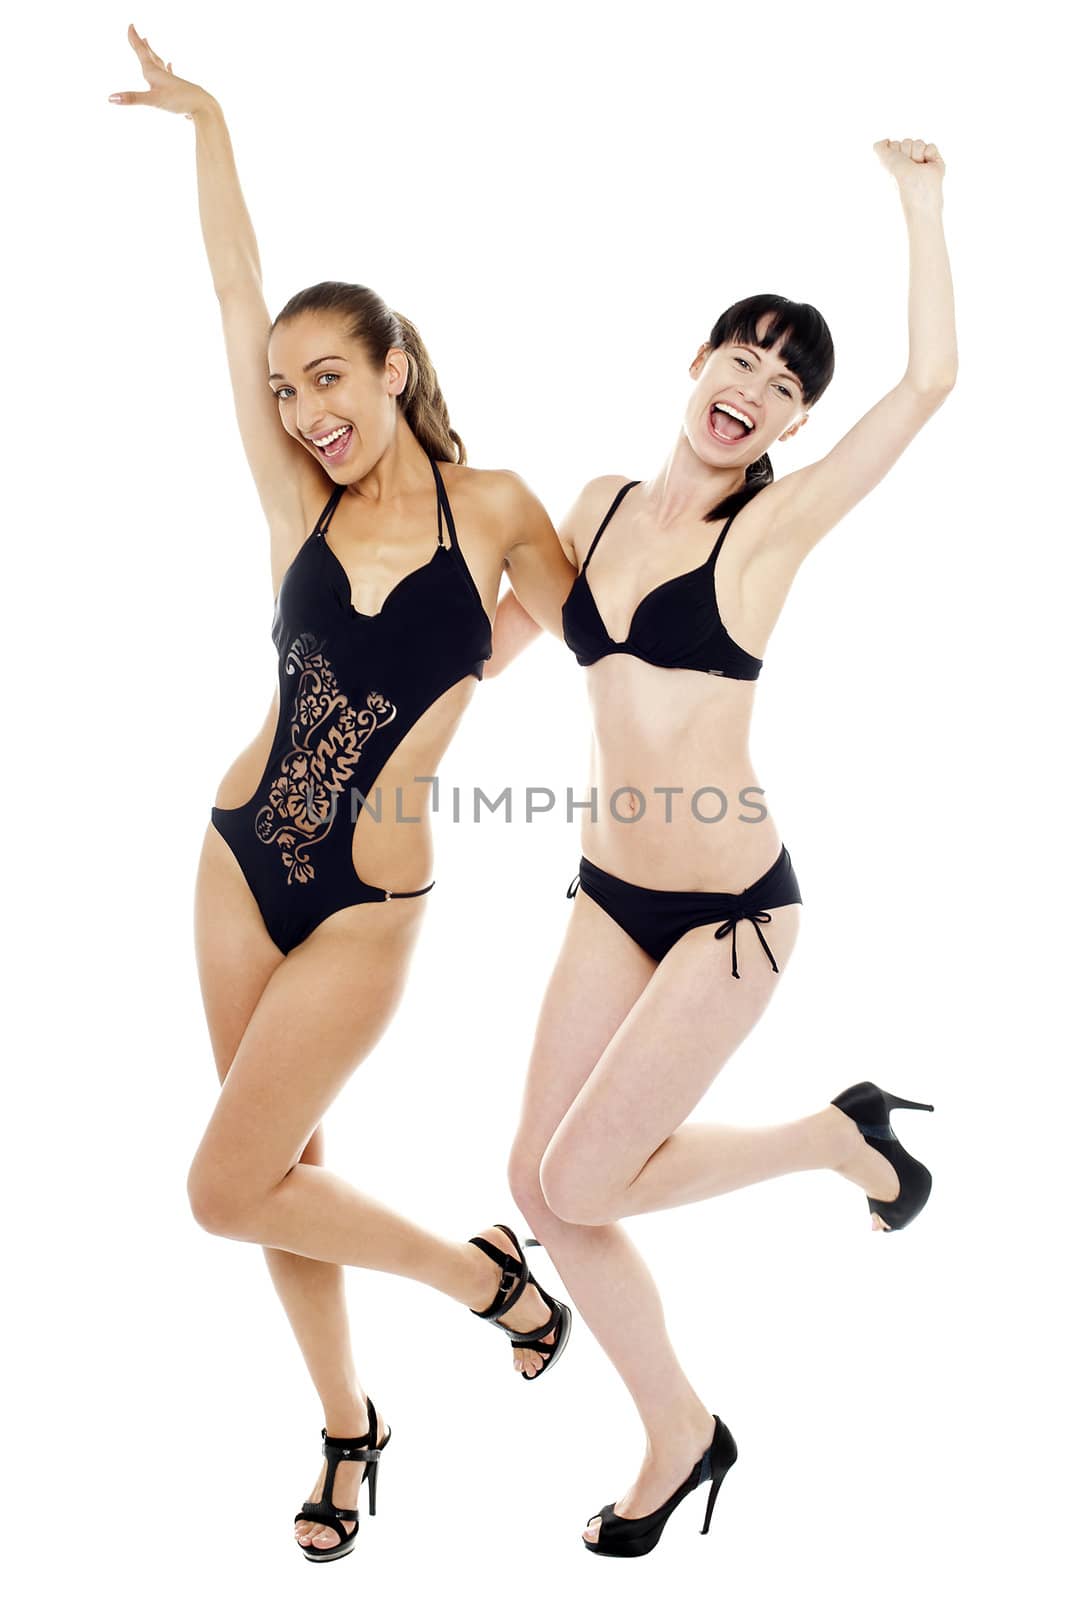 Sexy bikini ladies in joyous mood rejoicing together by stockyimages